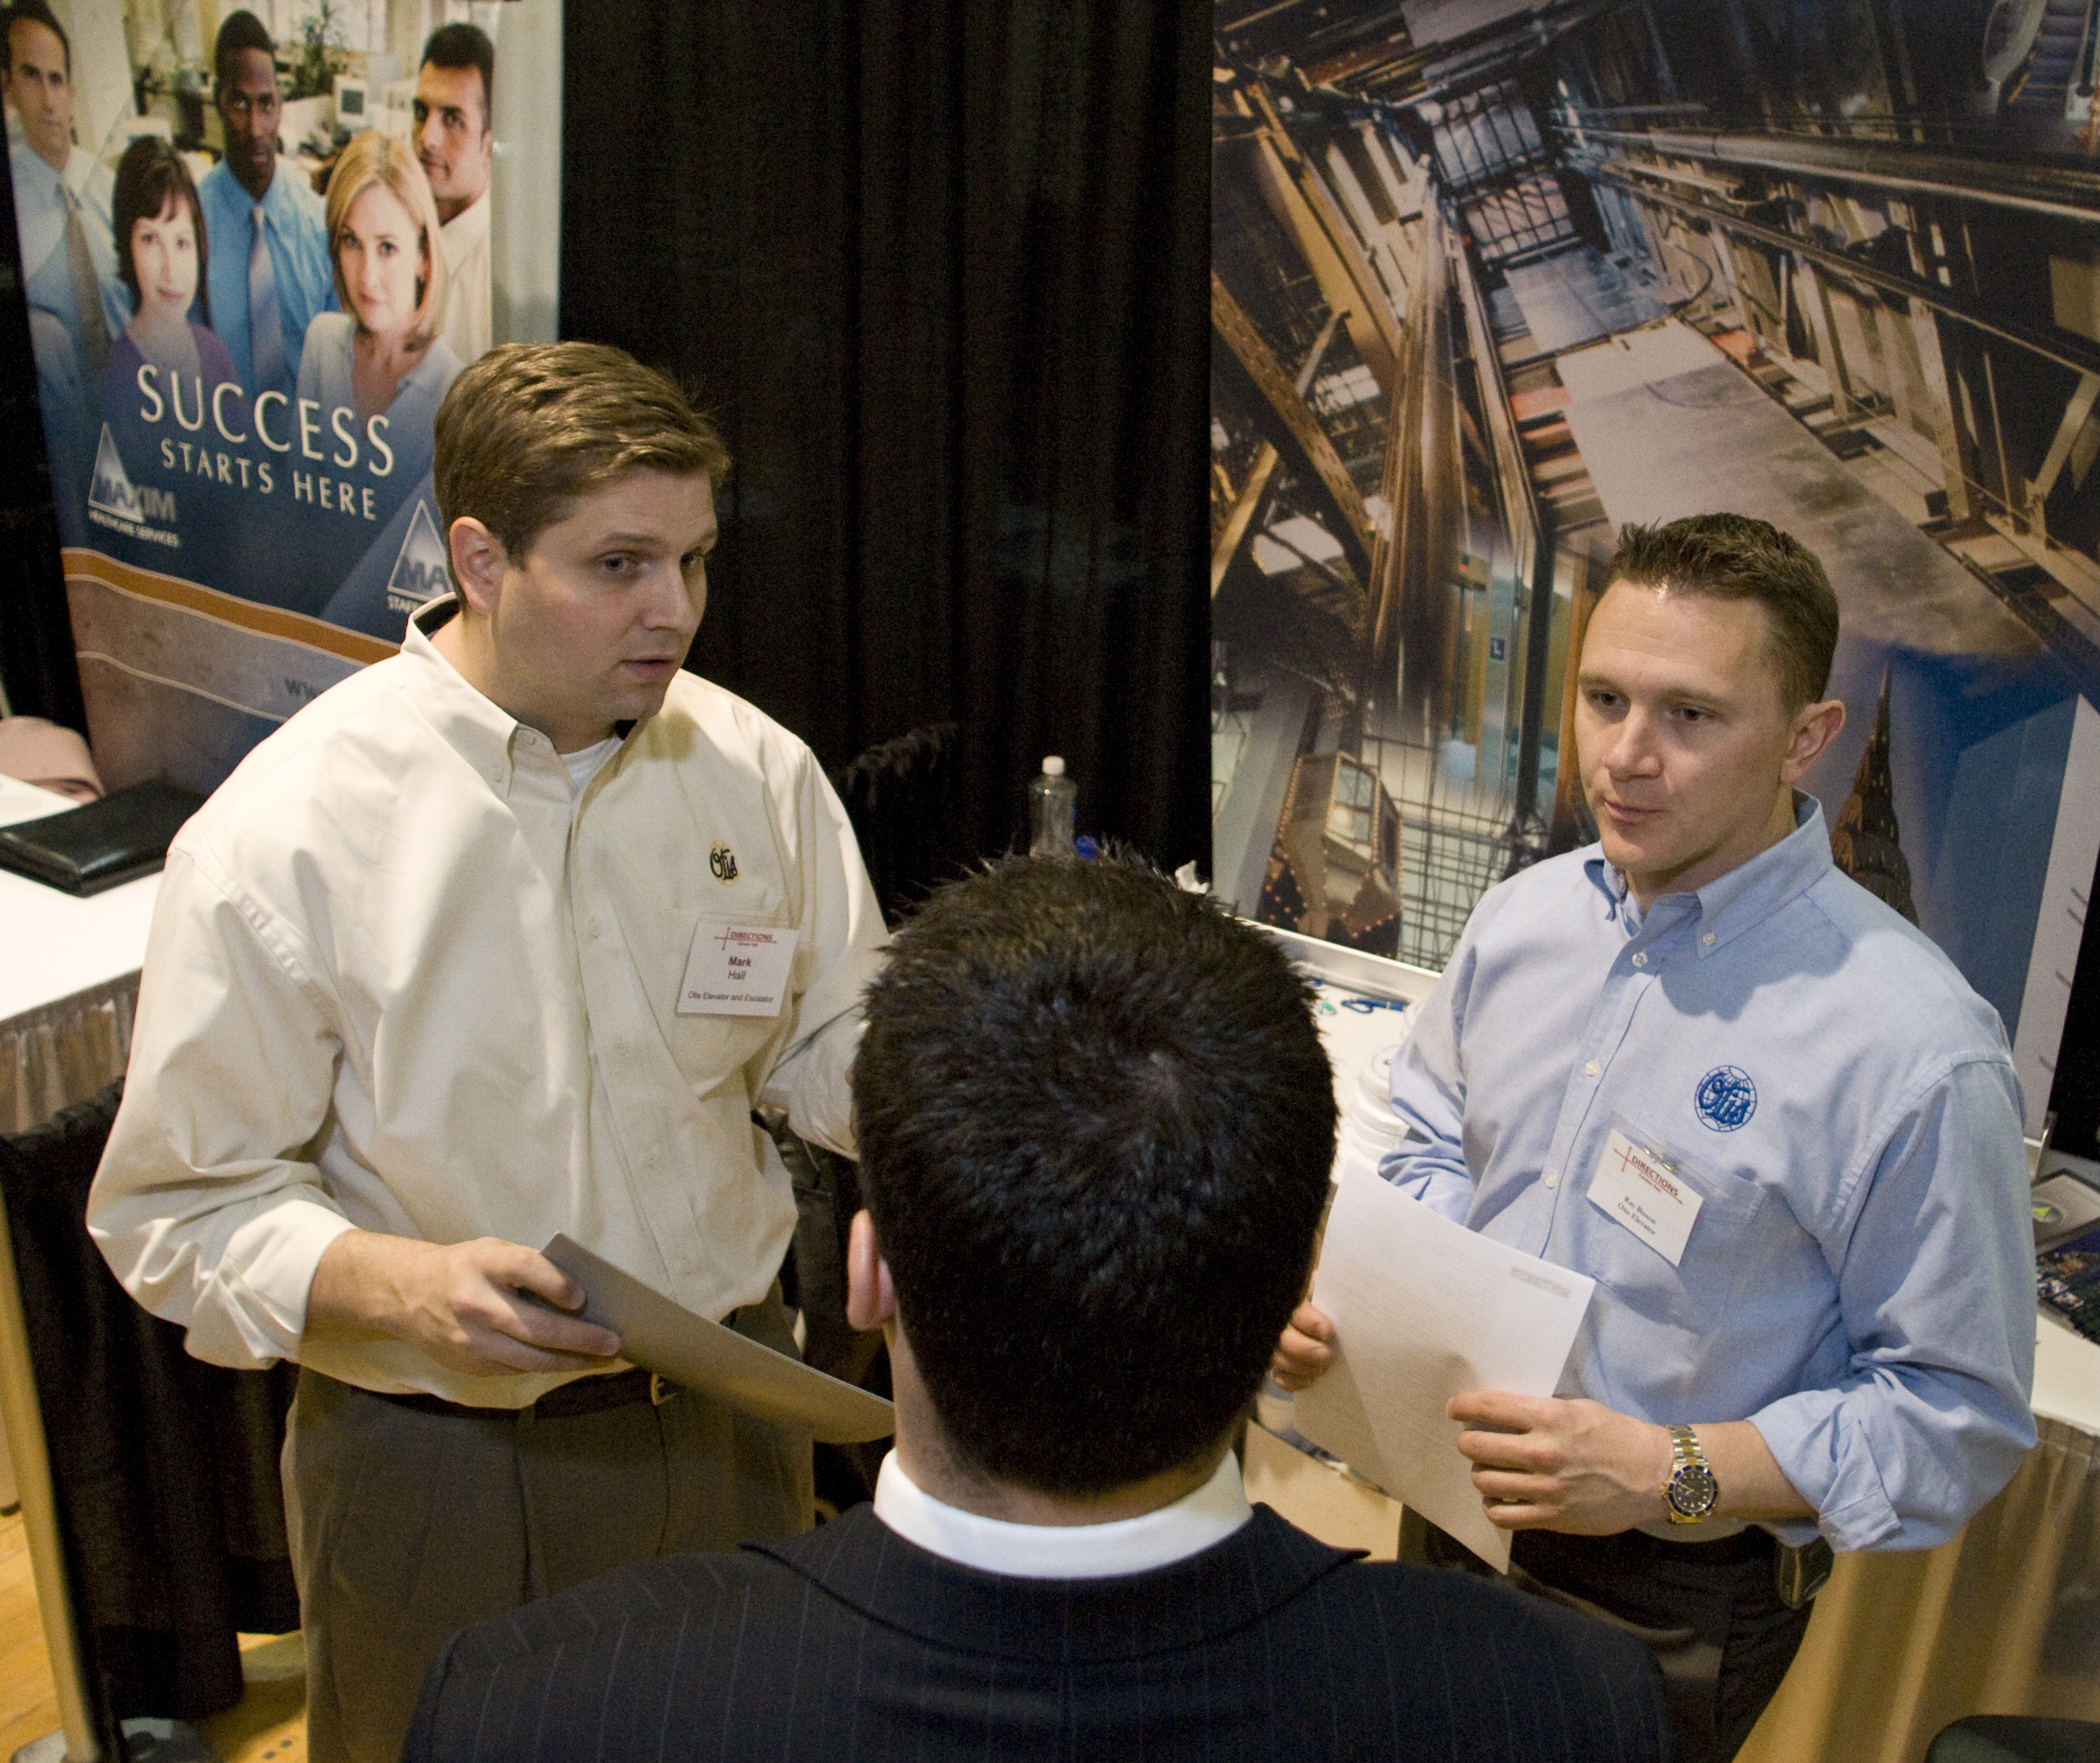 Employers talk with student at job fair.